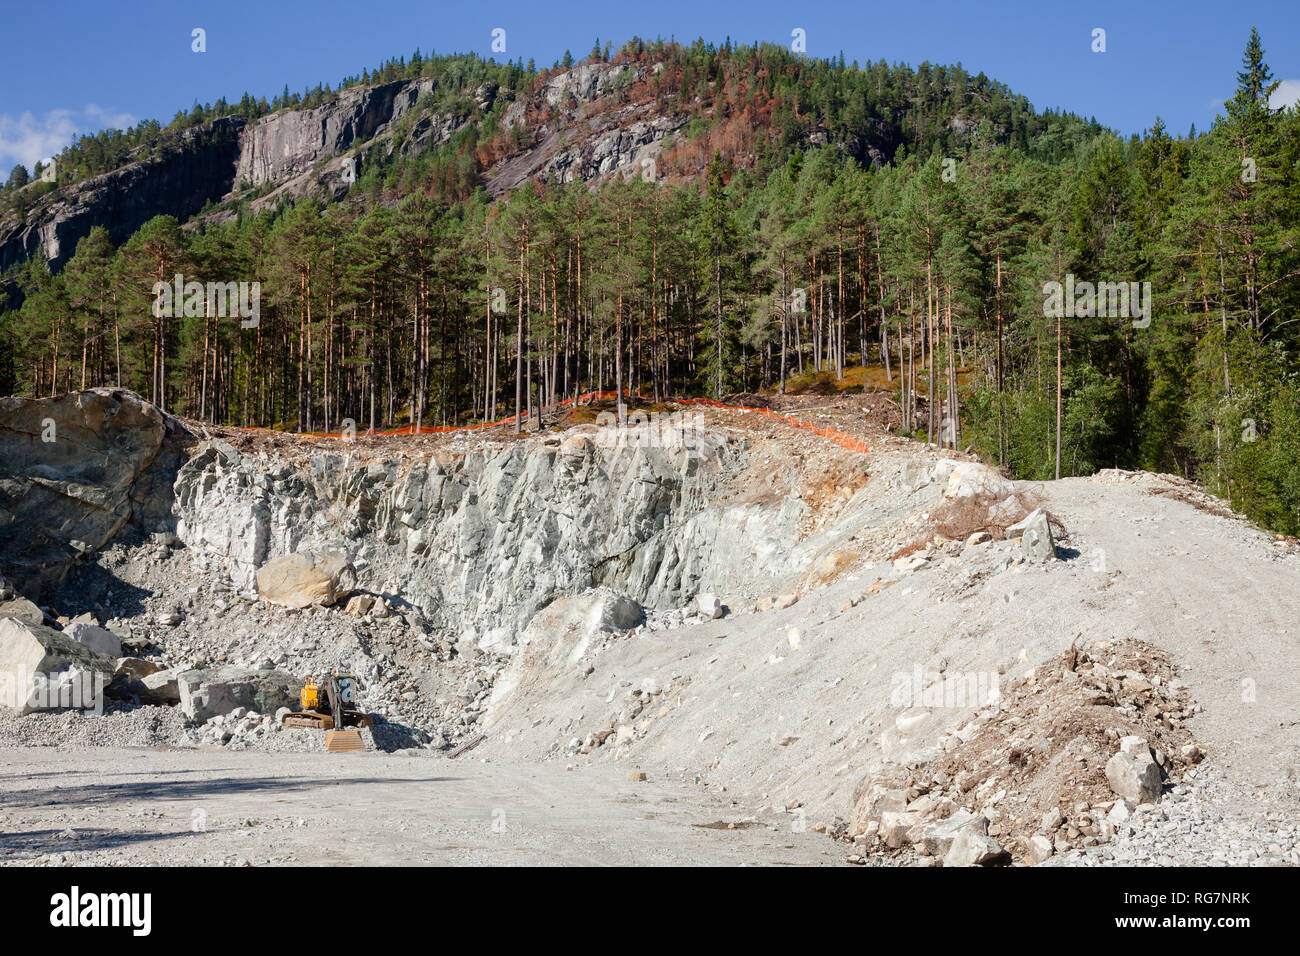 Excavator at small quarry in Norway, Scandinavia, mining construction aggregate and riprap Stock Photo